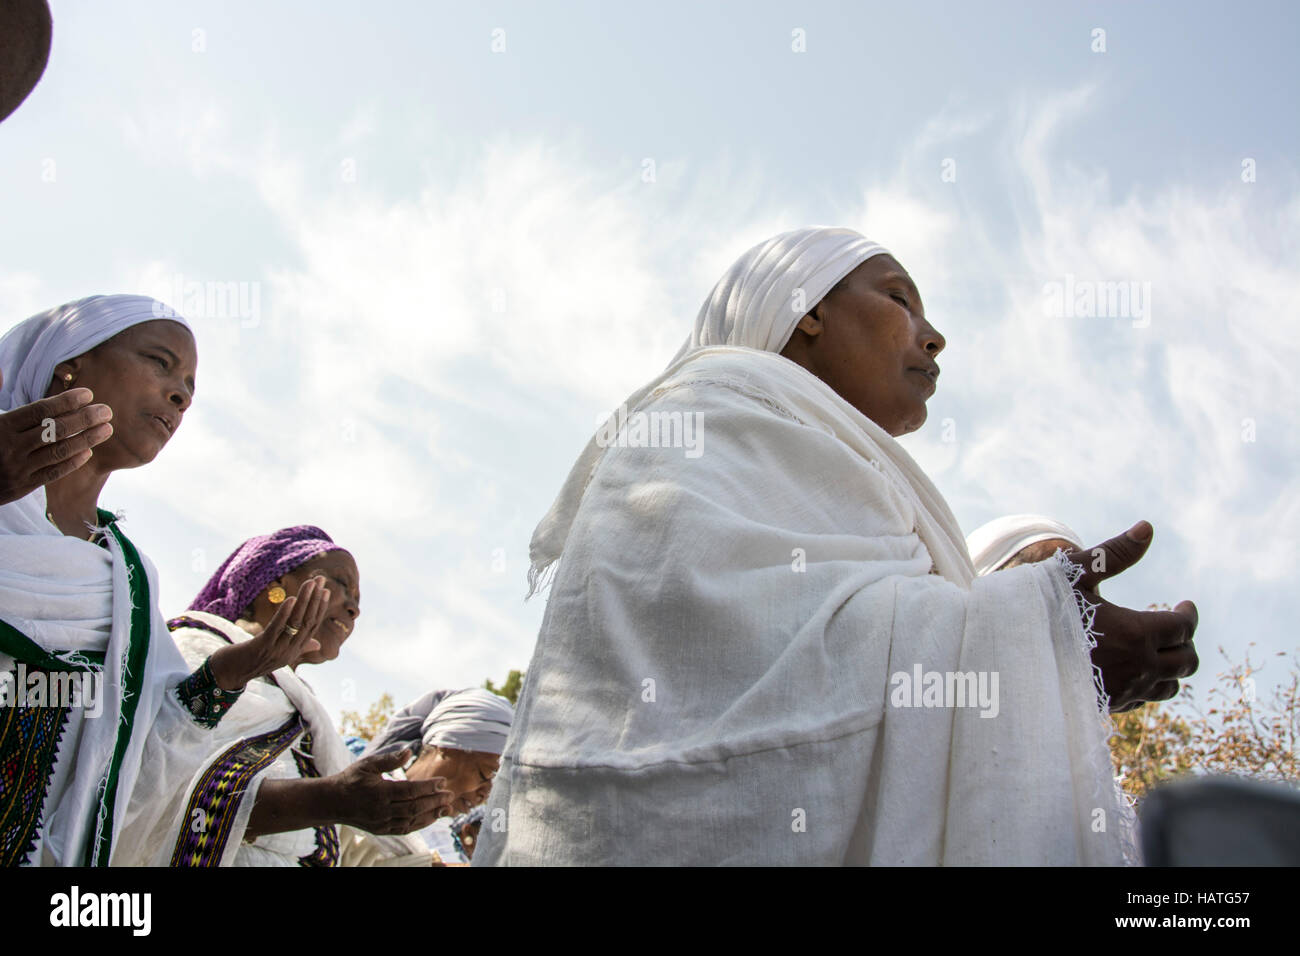 Ethiopian Jewish festival called Siged takes place in Jerusalem, Israel Stock Photo